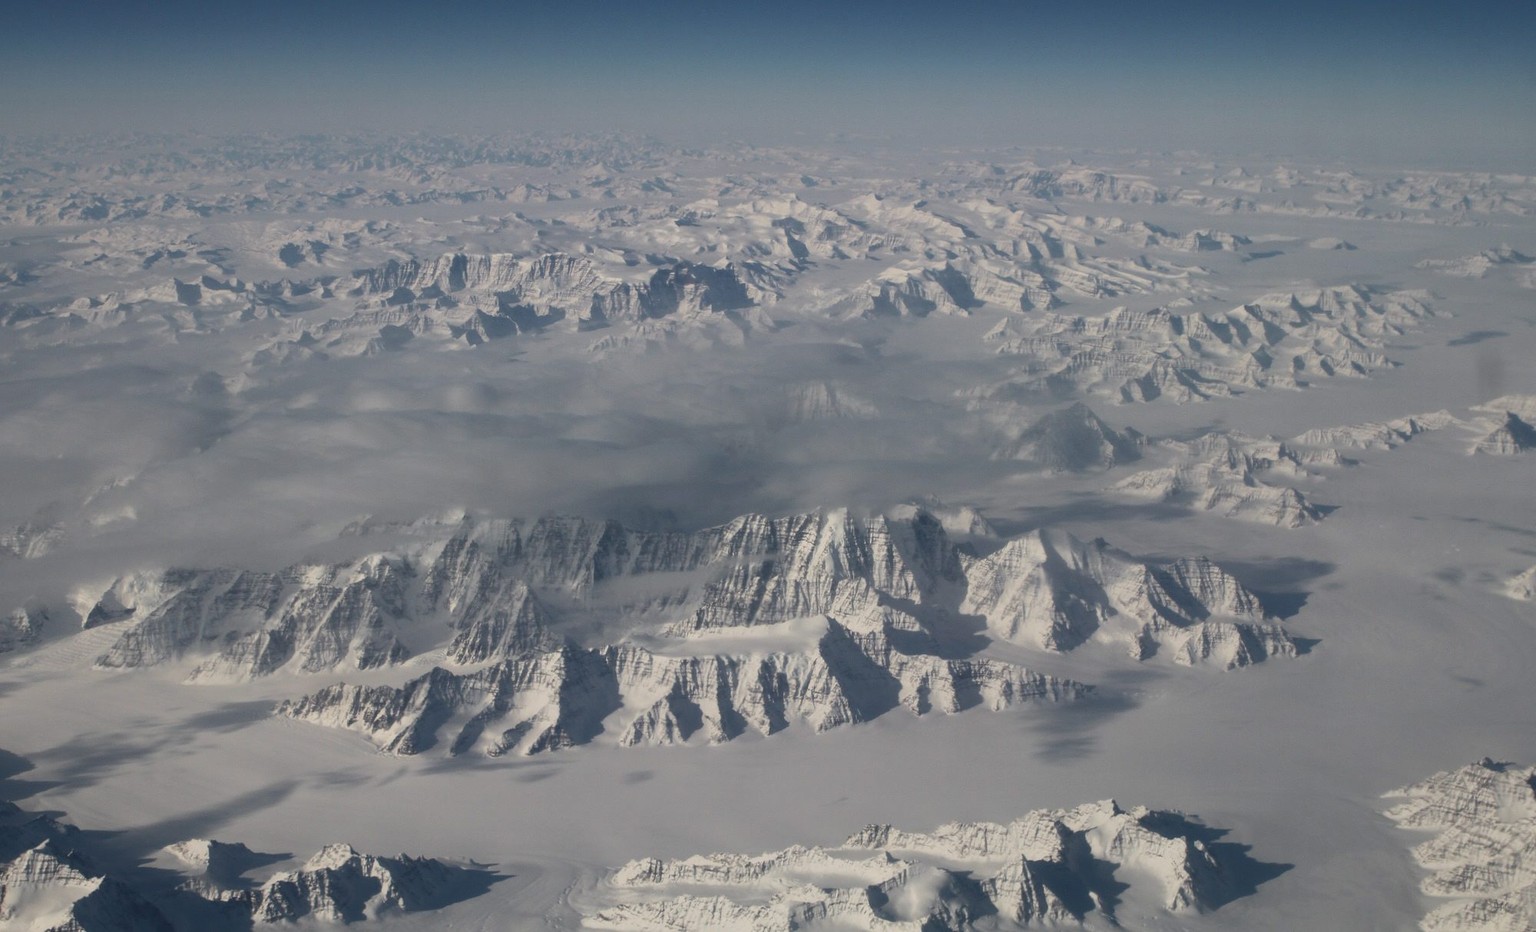 epa05234905 An aerial view made available by The Oceans Melting Greenland (OMG) field campaign team, flying NASA's G-III aircraft over Greenland at about 40,000 feet on 26 March 2016. On a clear day,  ...